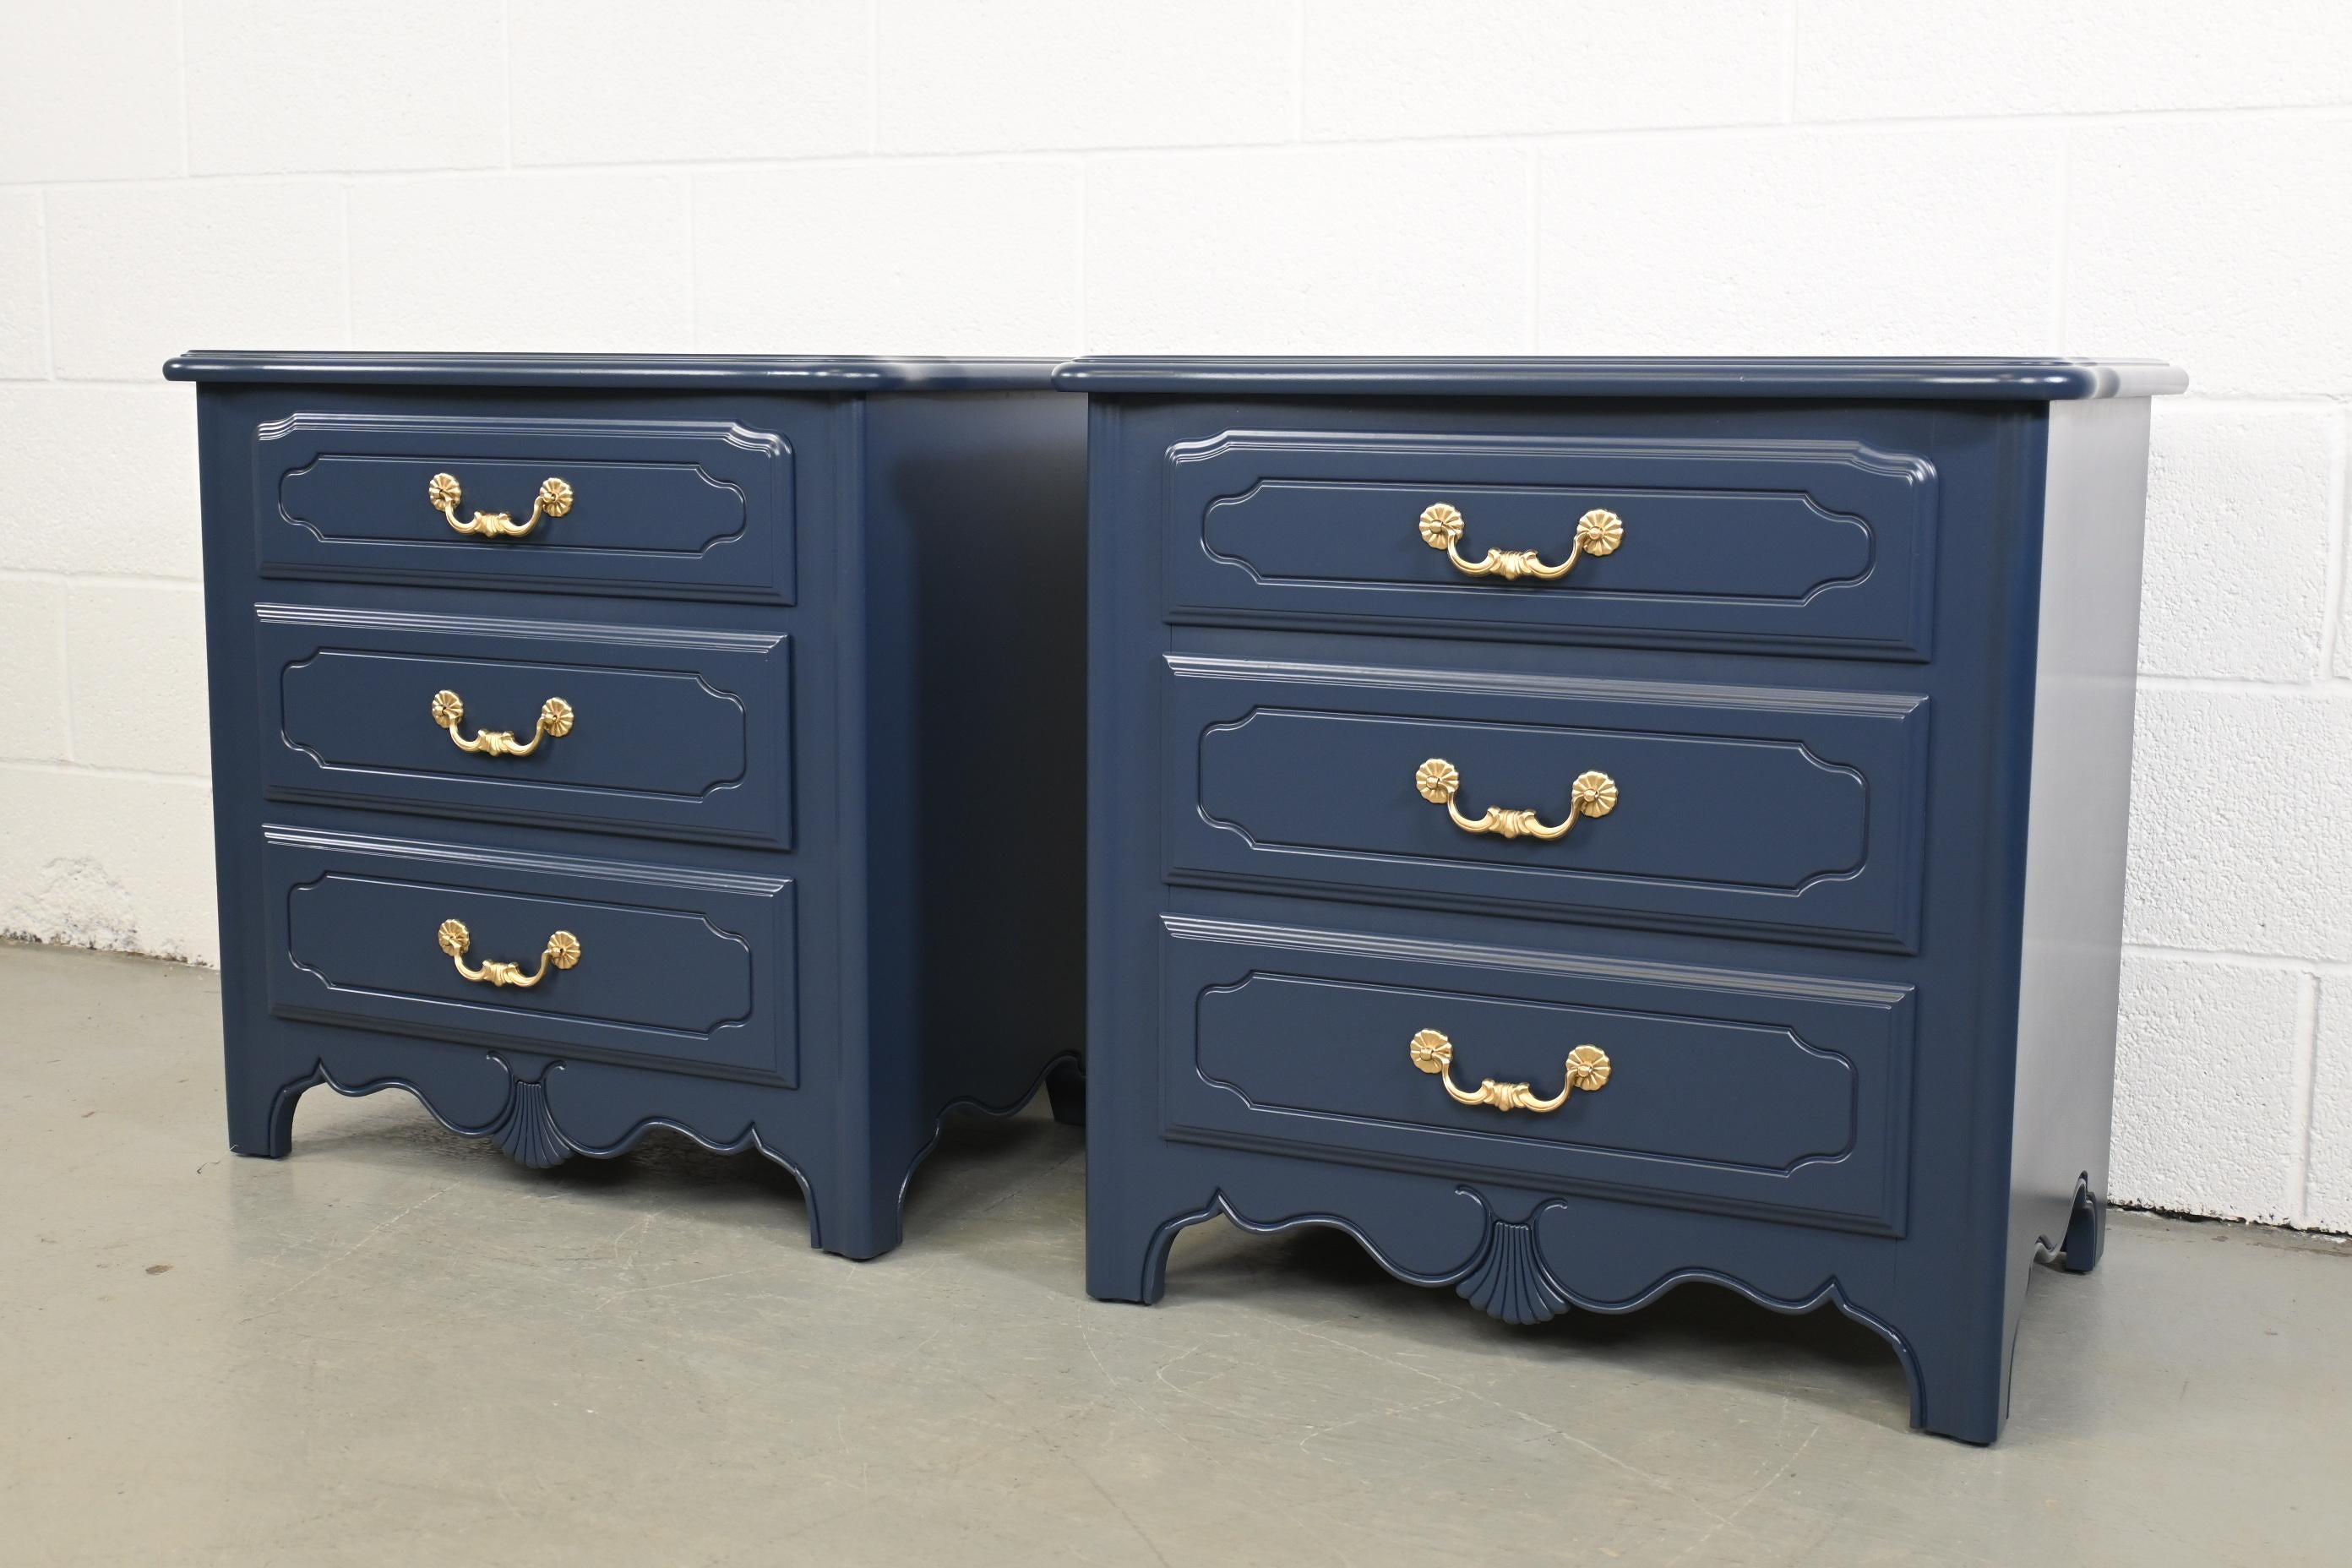 Ethan Allen French Country Navy Lacquered Three Drawer Pair of Nightstands

Ethan Allen, USA, 1993

Measures: 26 Wide x 17.5 Deep x 25.25 High.

French Country style three drawer nightstands refinished in Sherwin Williams Naval lacquer with